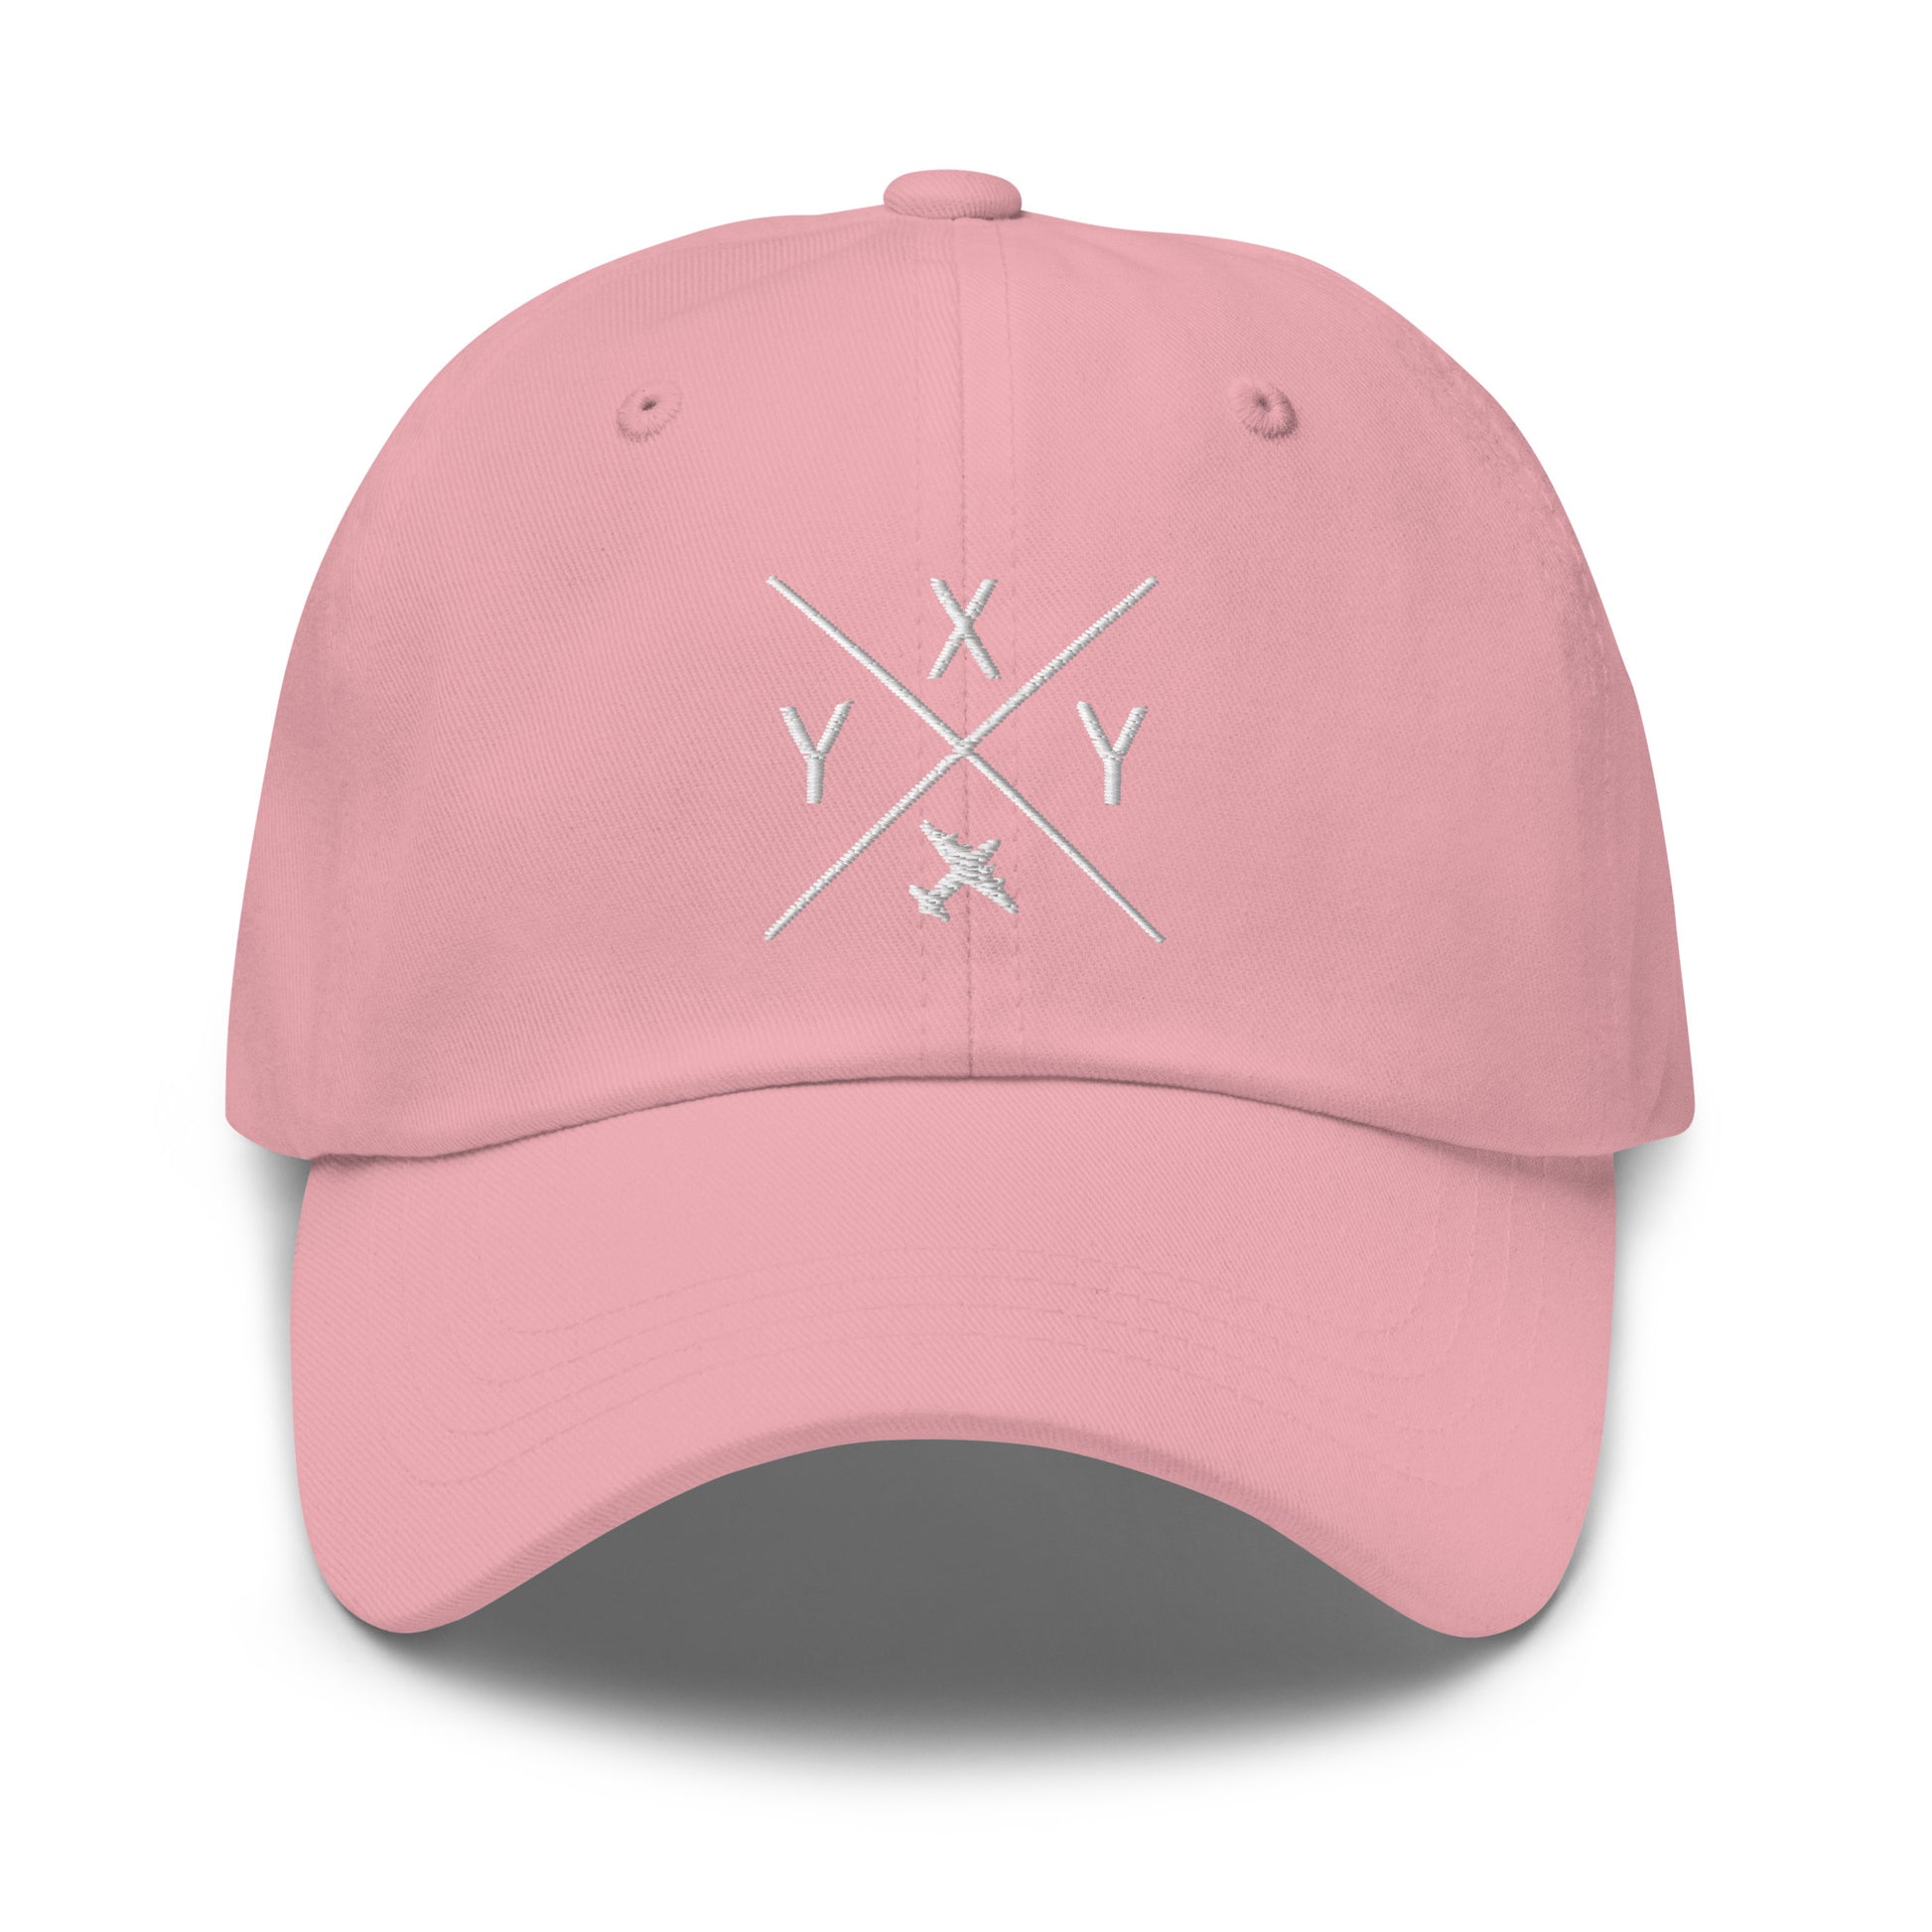 Crossed-X Dad Hat - White • YXY Whitehorse • YHM Designs - Image 18